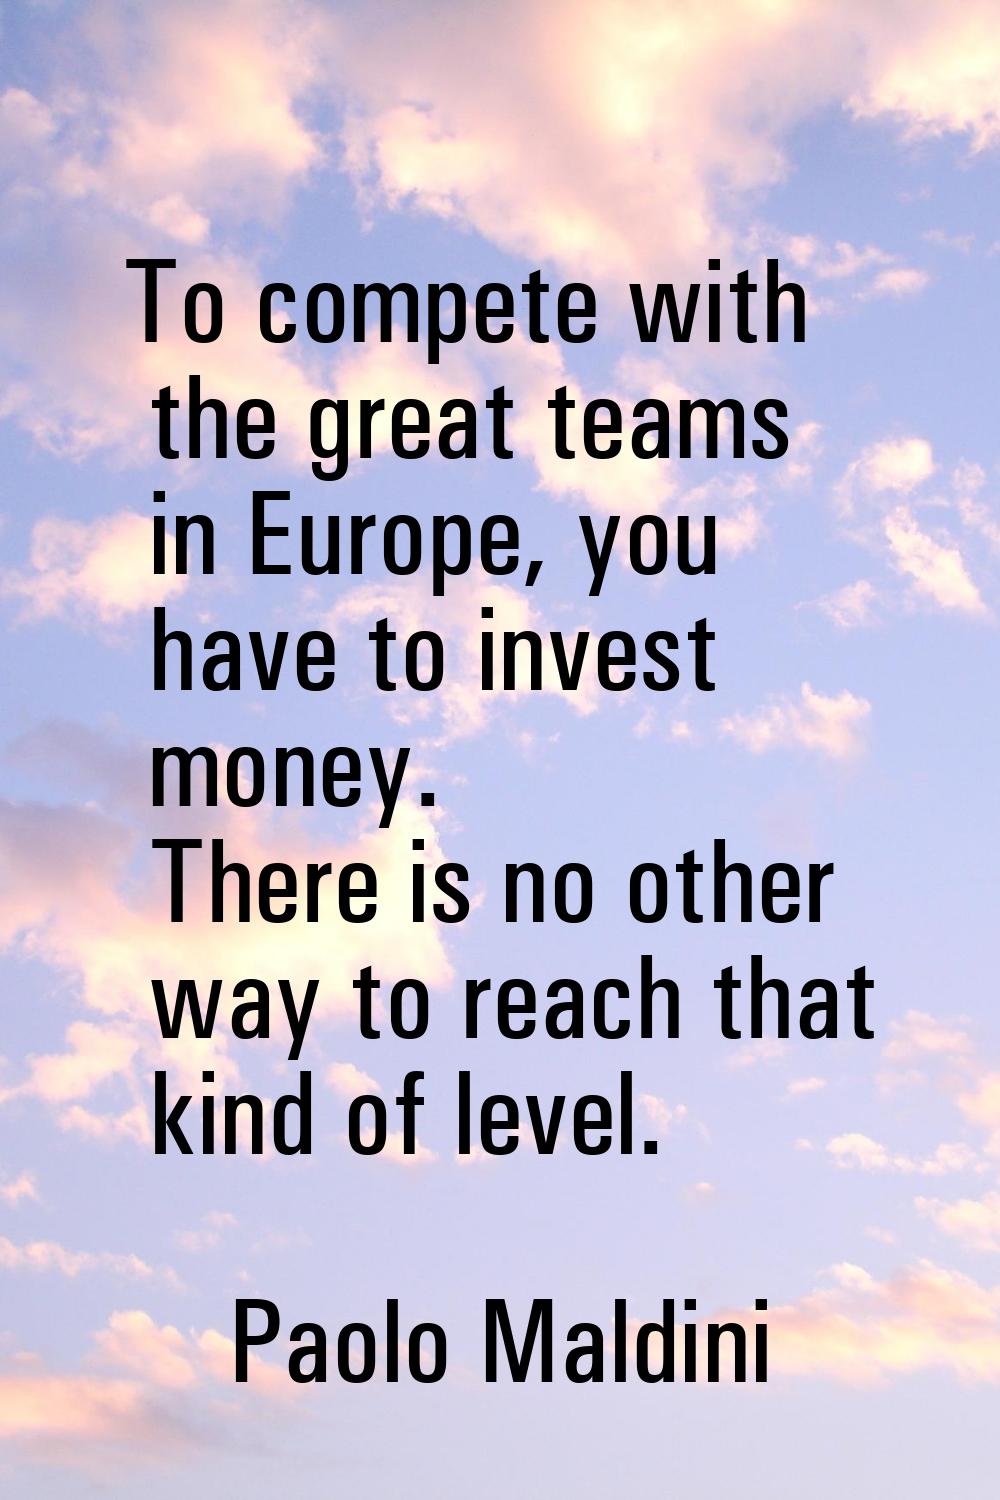 To compete with the great teams in Europe, you have to invest money. There is no other way to reach